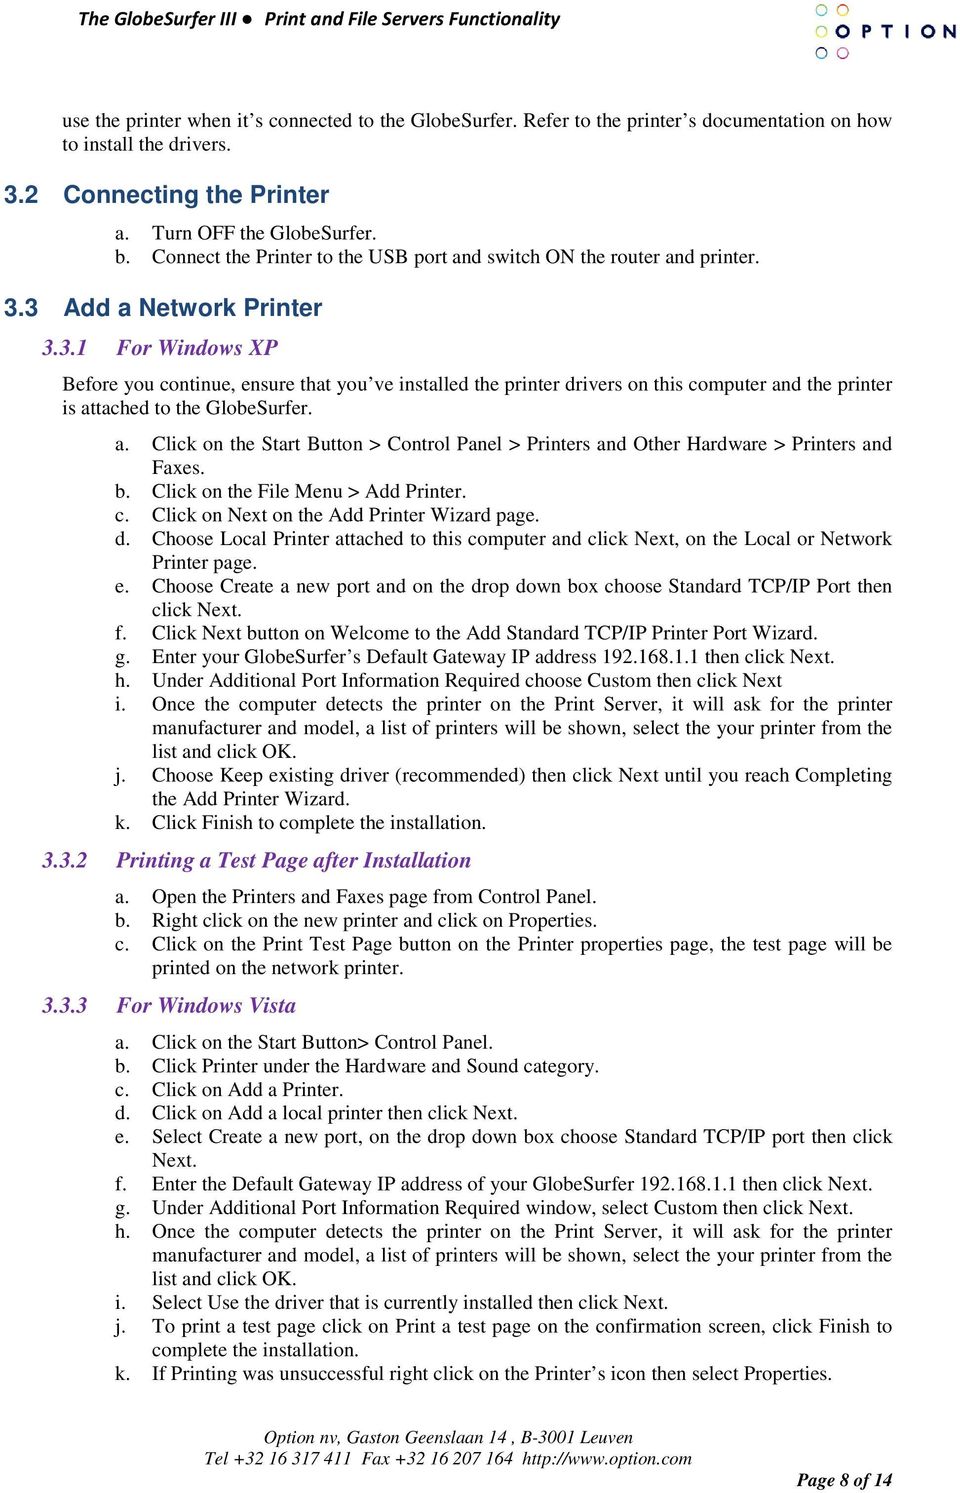 3 Add a Network Printer 3.3.1 For Windows XP Before you continue, ensure that you ve installed the printer drivers on this computer and the printer is attached to the GlobeSurfer. a. Click on the Start Button > Control Panel > Printers and Other Hardware > Printers and Faxes.